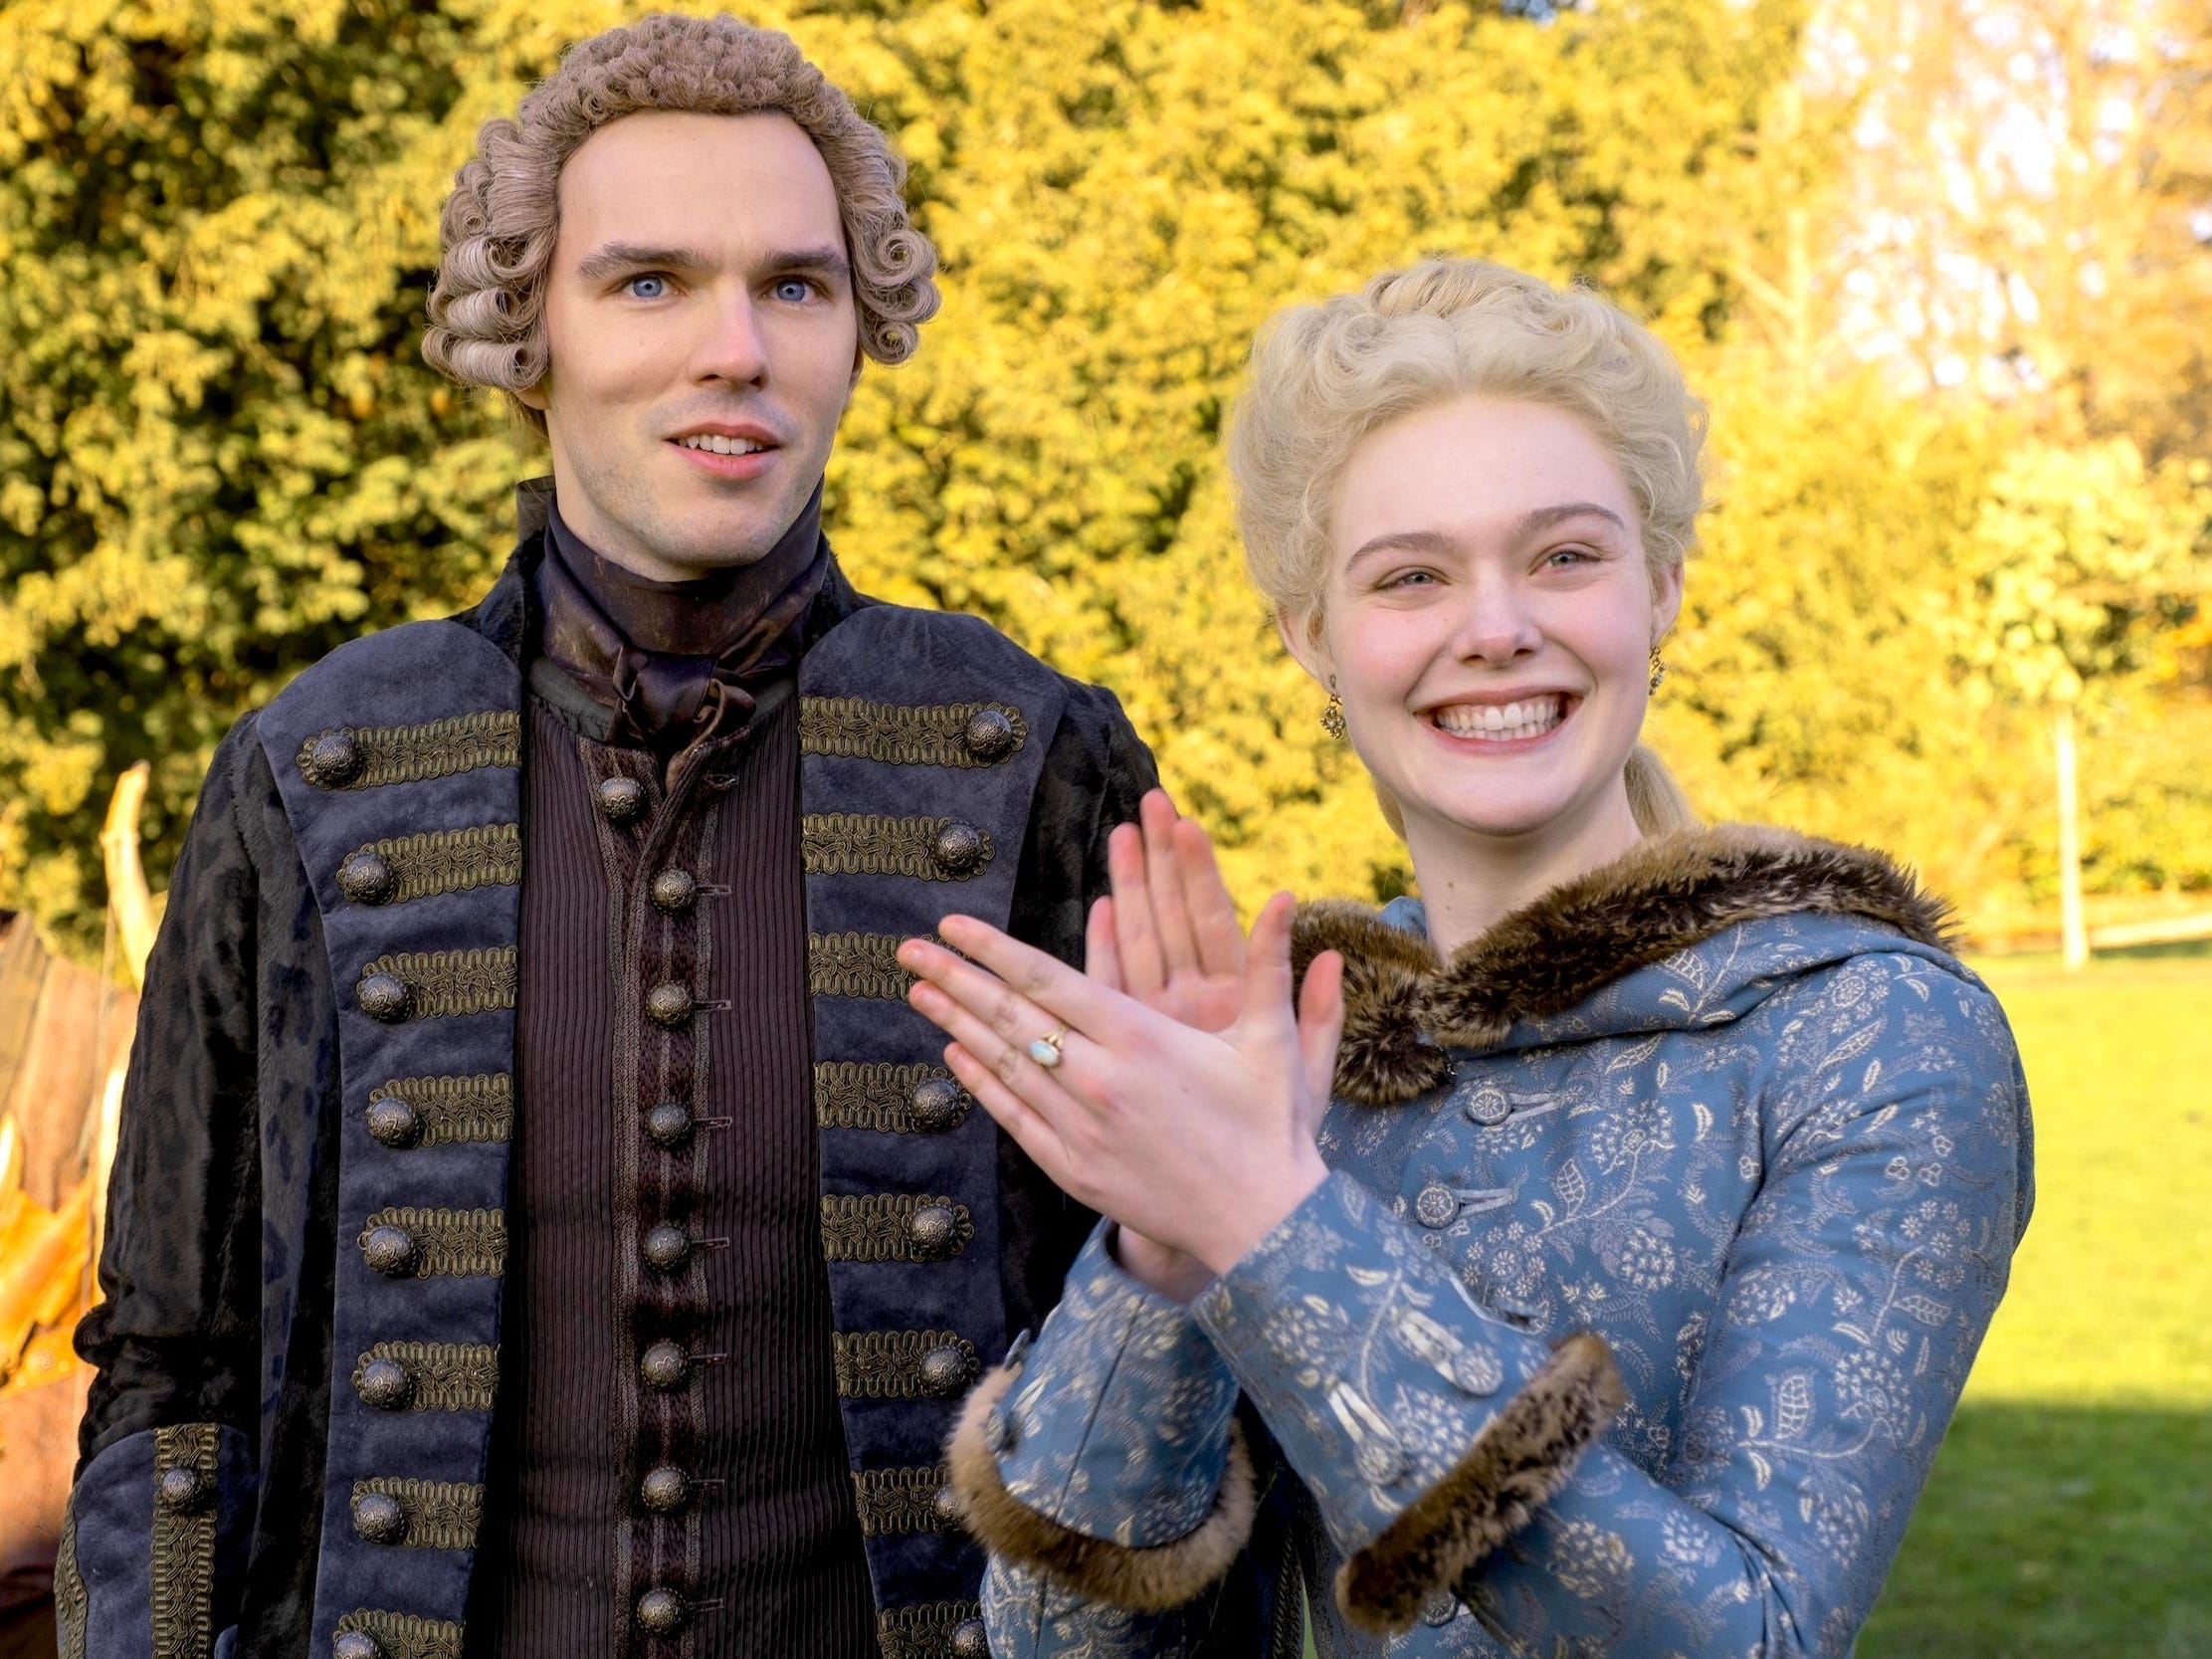 <p><strong>Summary: </strong>"The Great" is a satire loosely based on the rise of Empress Catherine the Great of Russia. After Catherine (Elle Fanning) marries Emperor Peter of Russia (Nicholas Hoult), she realizes he is a spiteful, selfish brat. Hence, she begins to plot to overthrow him.</p><p><strong>Why you'll like it: </strong><a href="https://www.insider.com/the-great-sacha-dhawan-praises-orlo-sexuality-exploration-interview-2021-12">"The Great"</a> reminds us that a period drama can be really funny. The series also boasts brilliant Emmy-nominated performances from both Fanning and Hoult.</p><p>"The Great" is streaming on Hulu.</p>